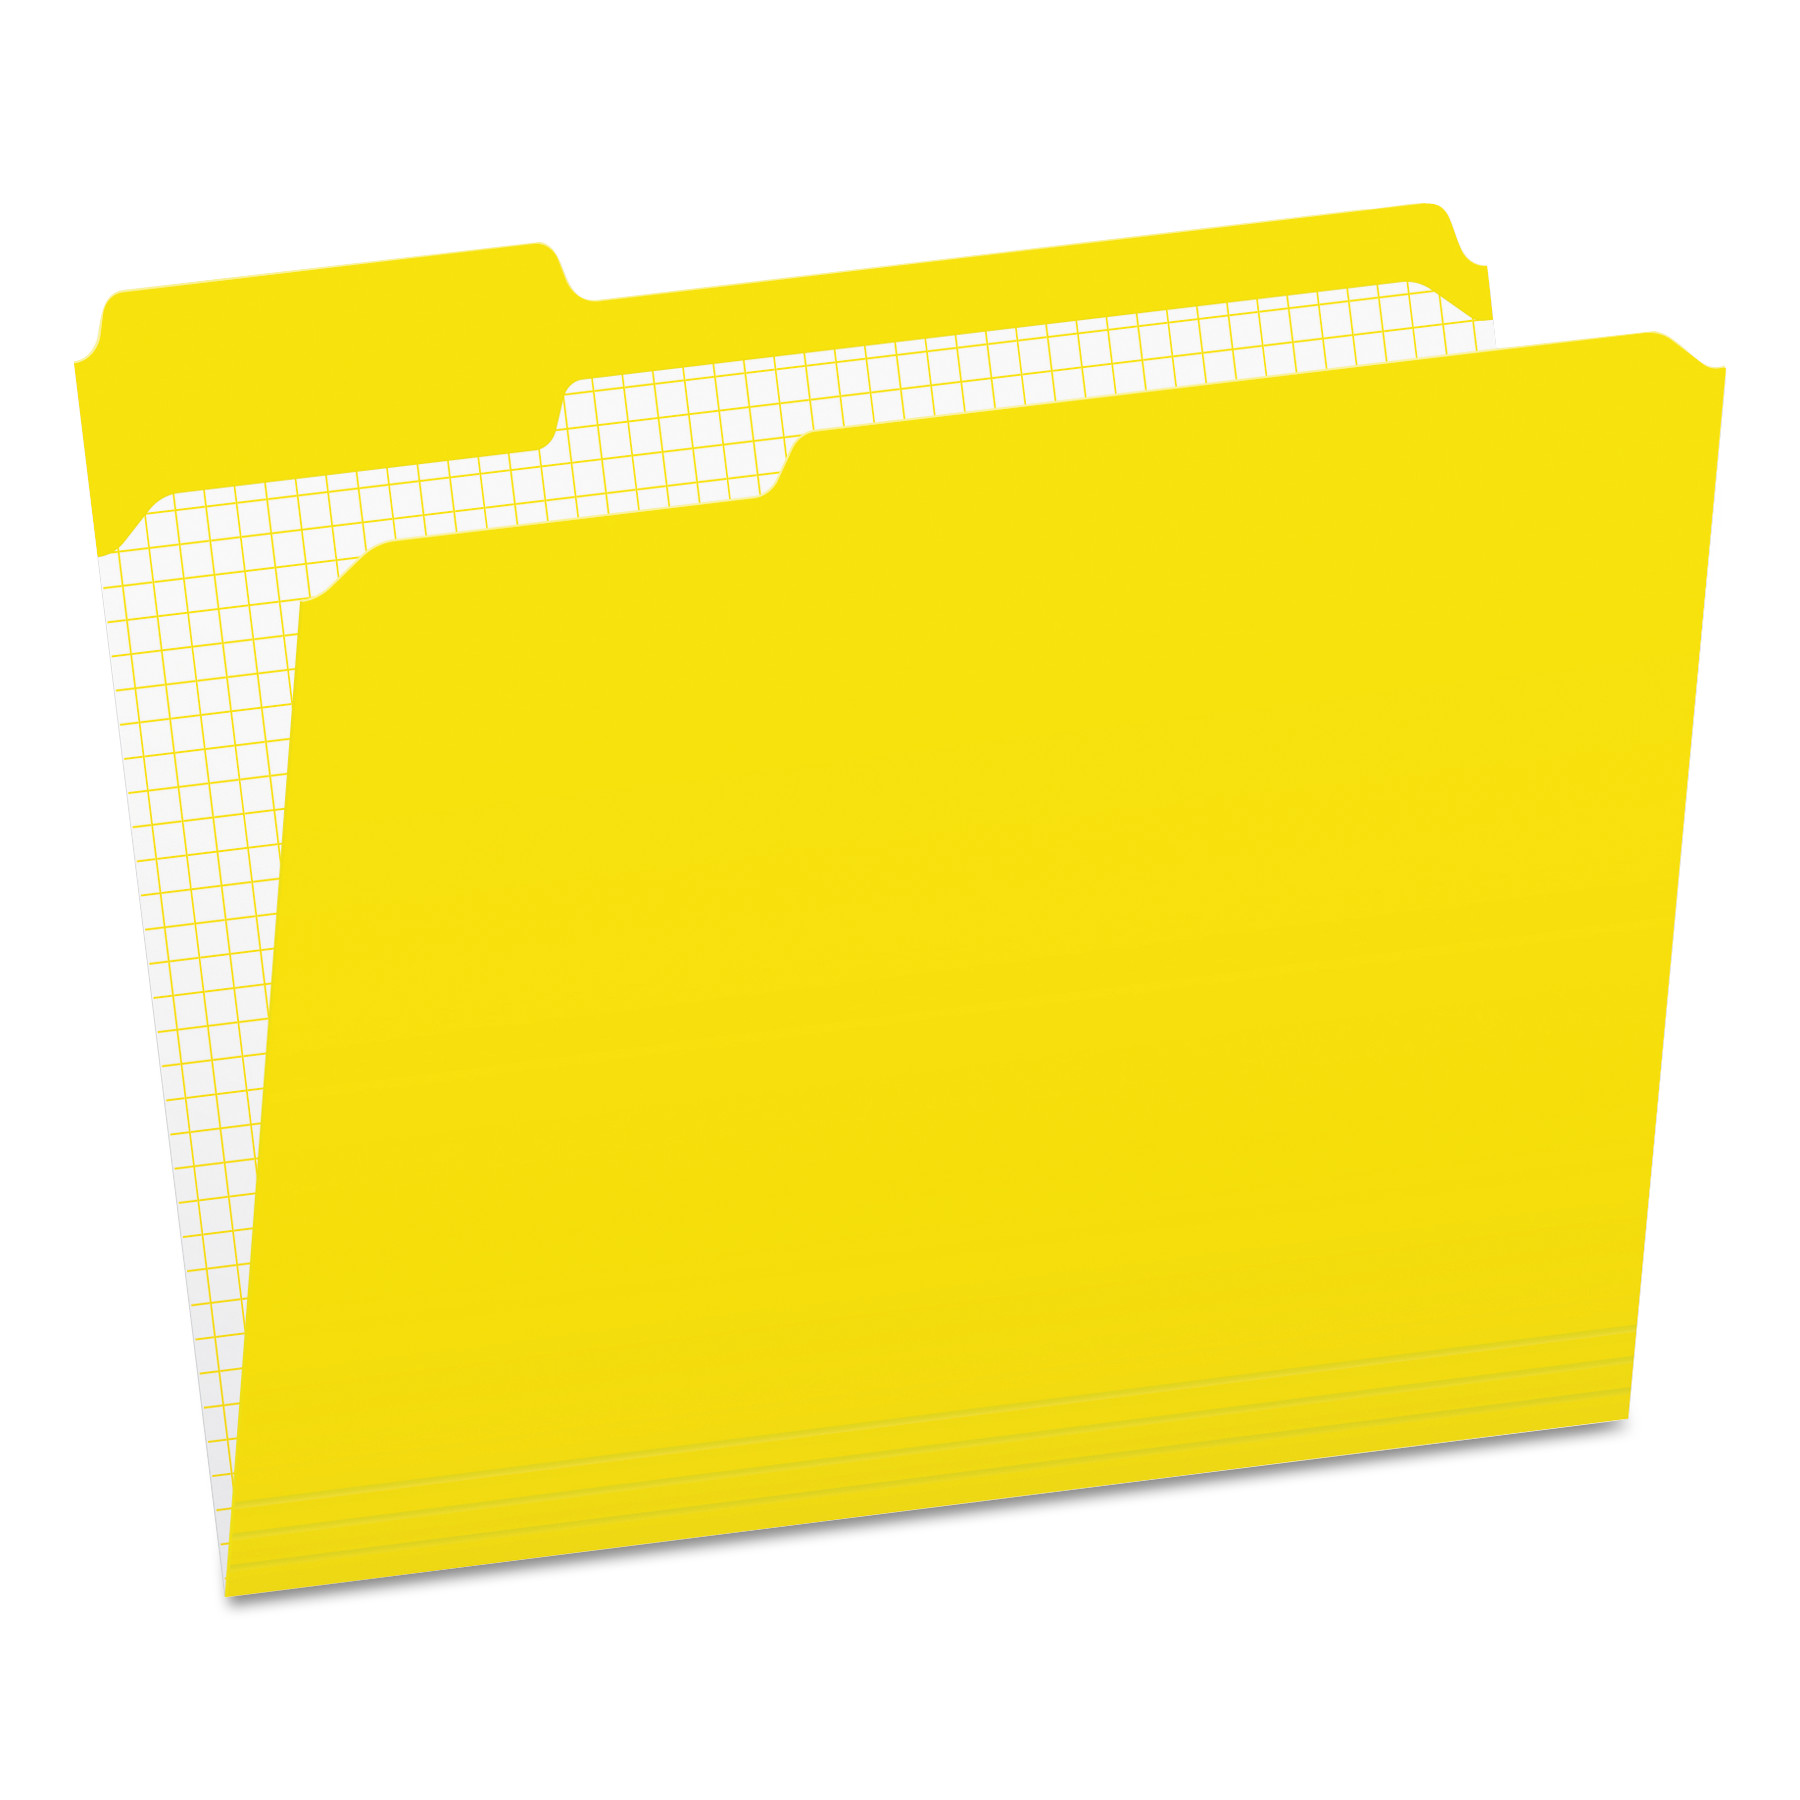  Pendaflex R152 1/3 YEL Double-Ply Reinforced Top Tab Colored File Folders, 1/3-Cut Tabs, Letter Size, Yellow, 100/Box (PFXR15213YEL) 